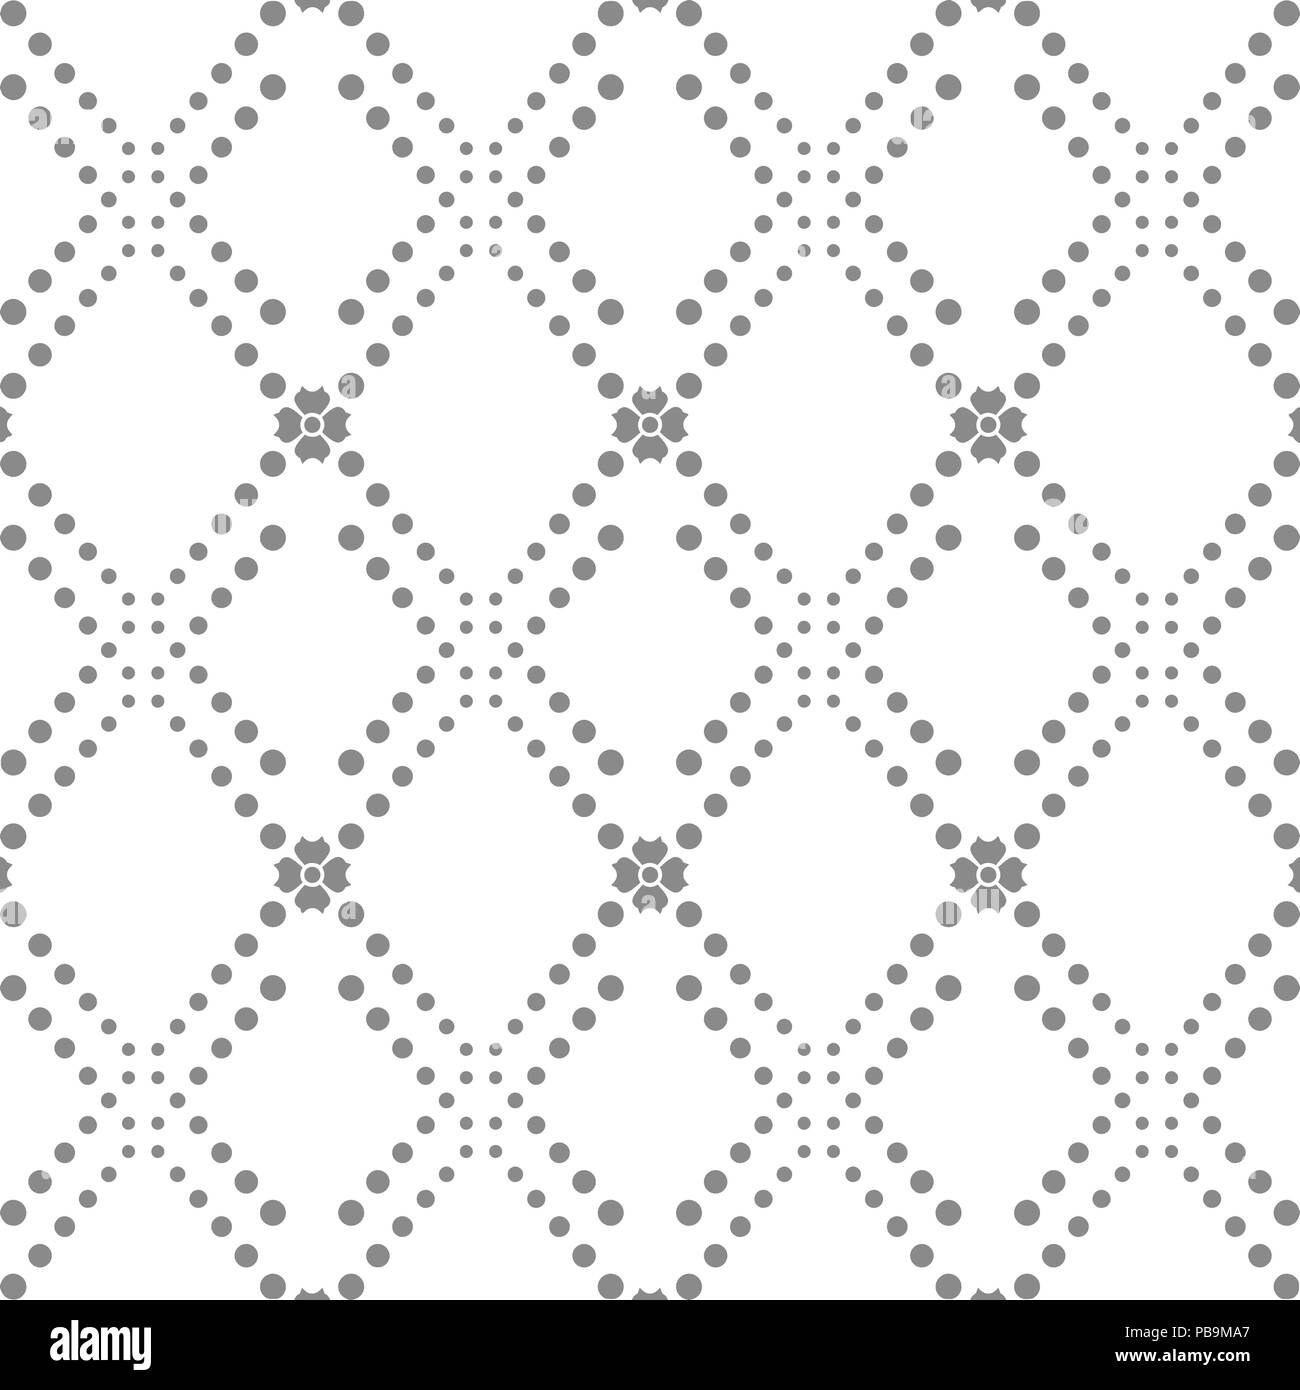 Background of gray seamless dots pattern Stock Vector